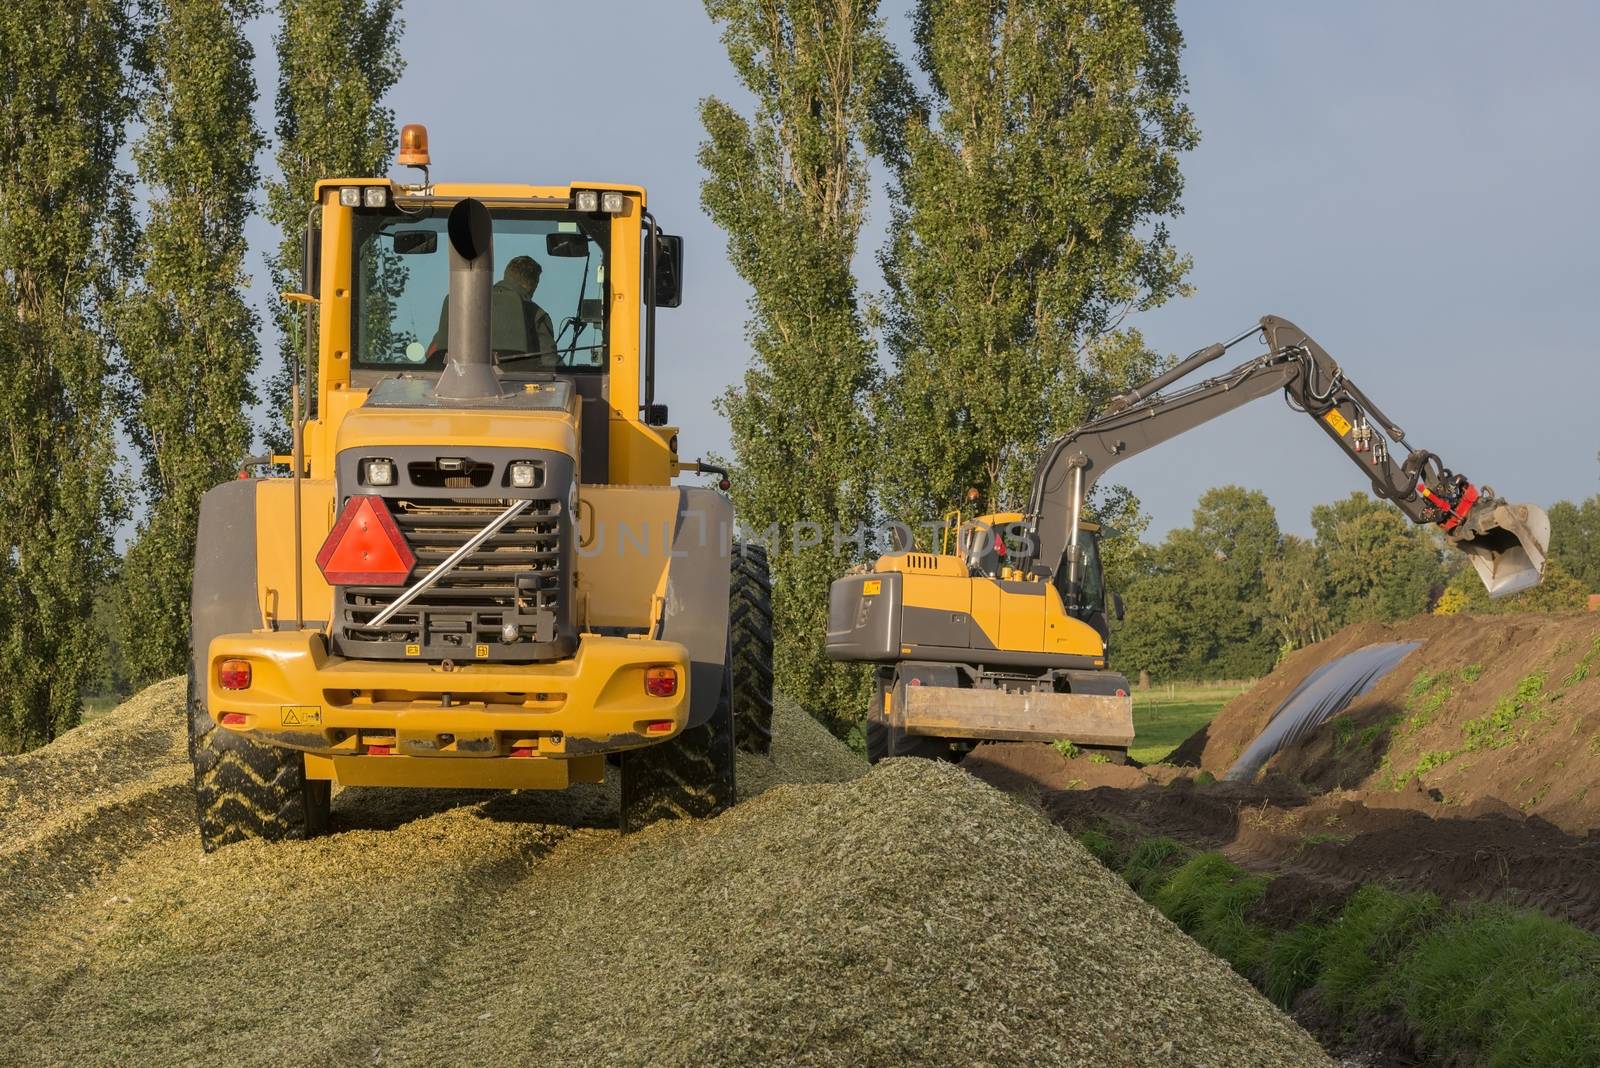 Agriculture shredded corn silage with a yellow shovel and excavator in the Netherlands
